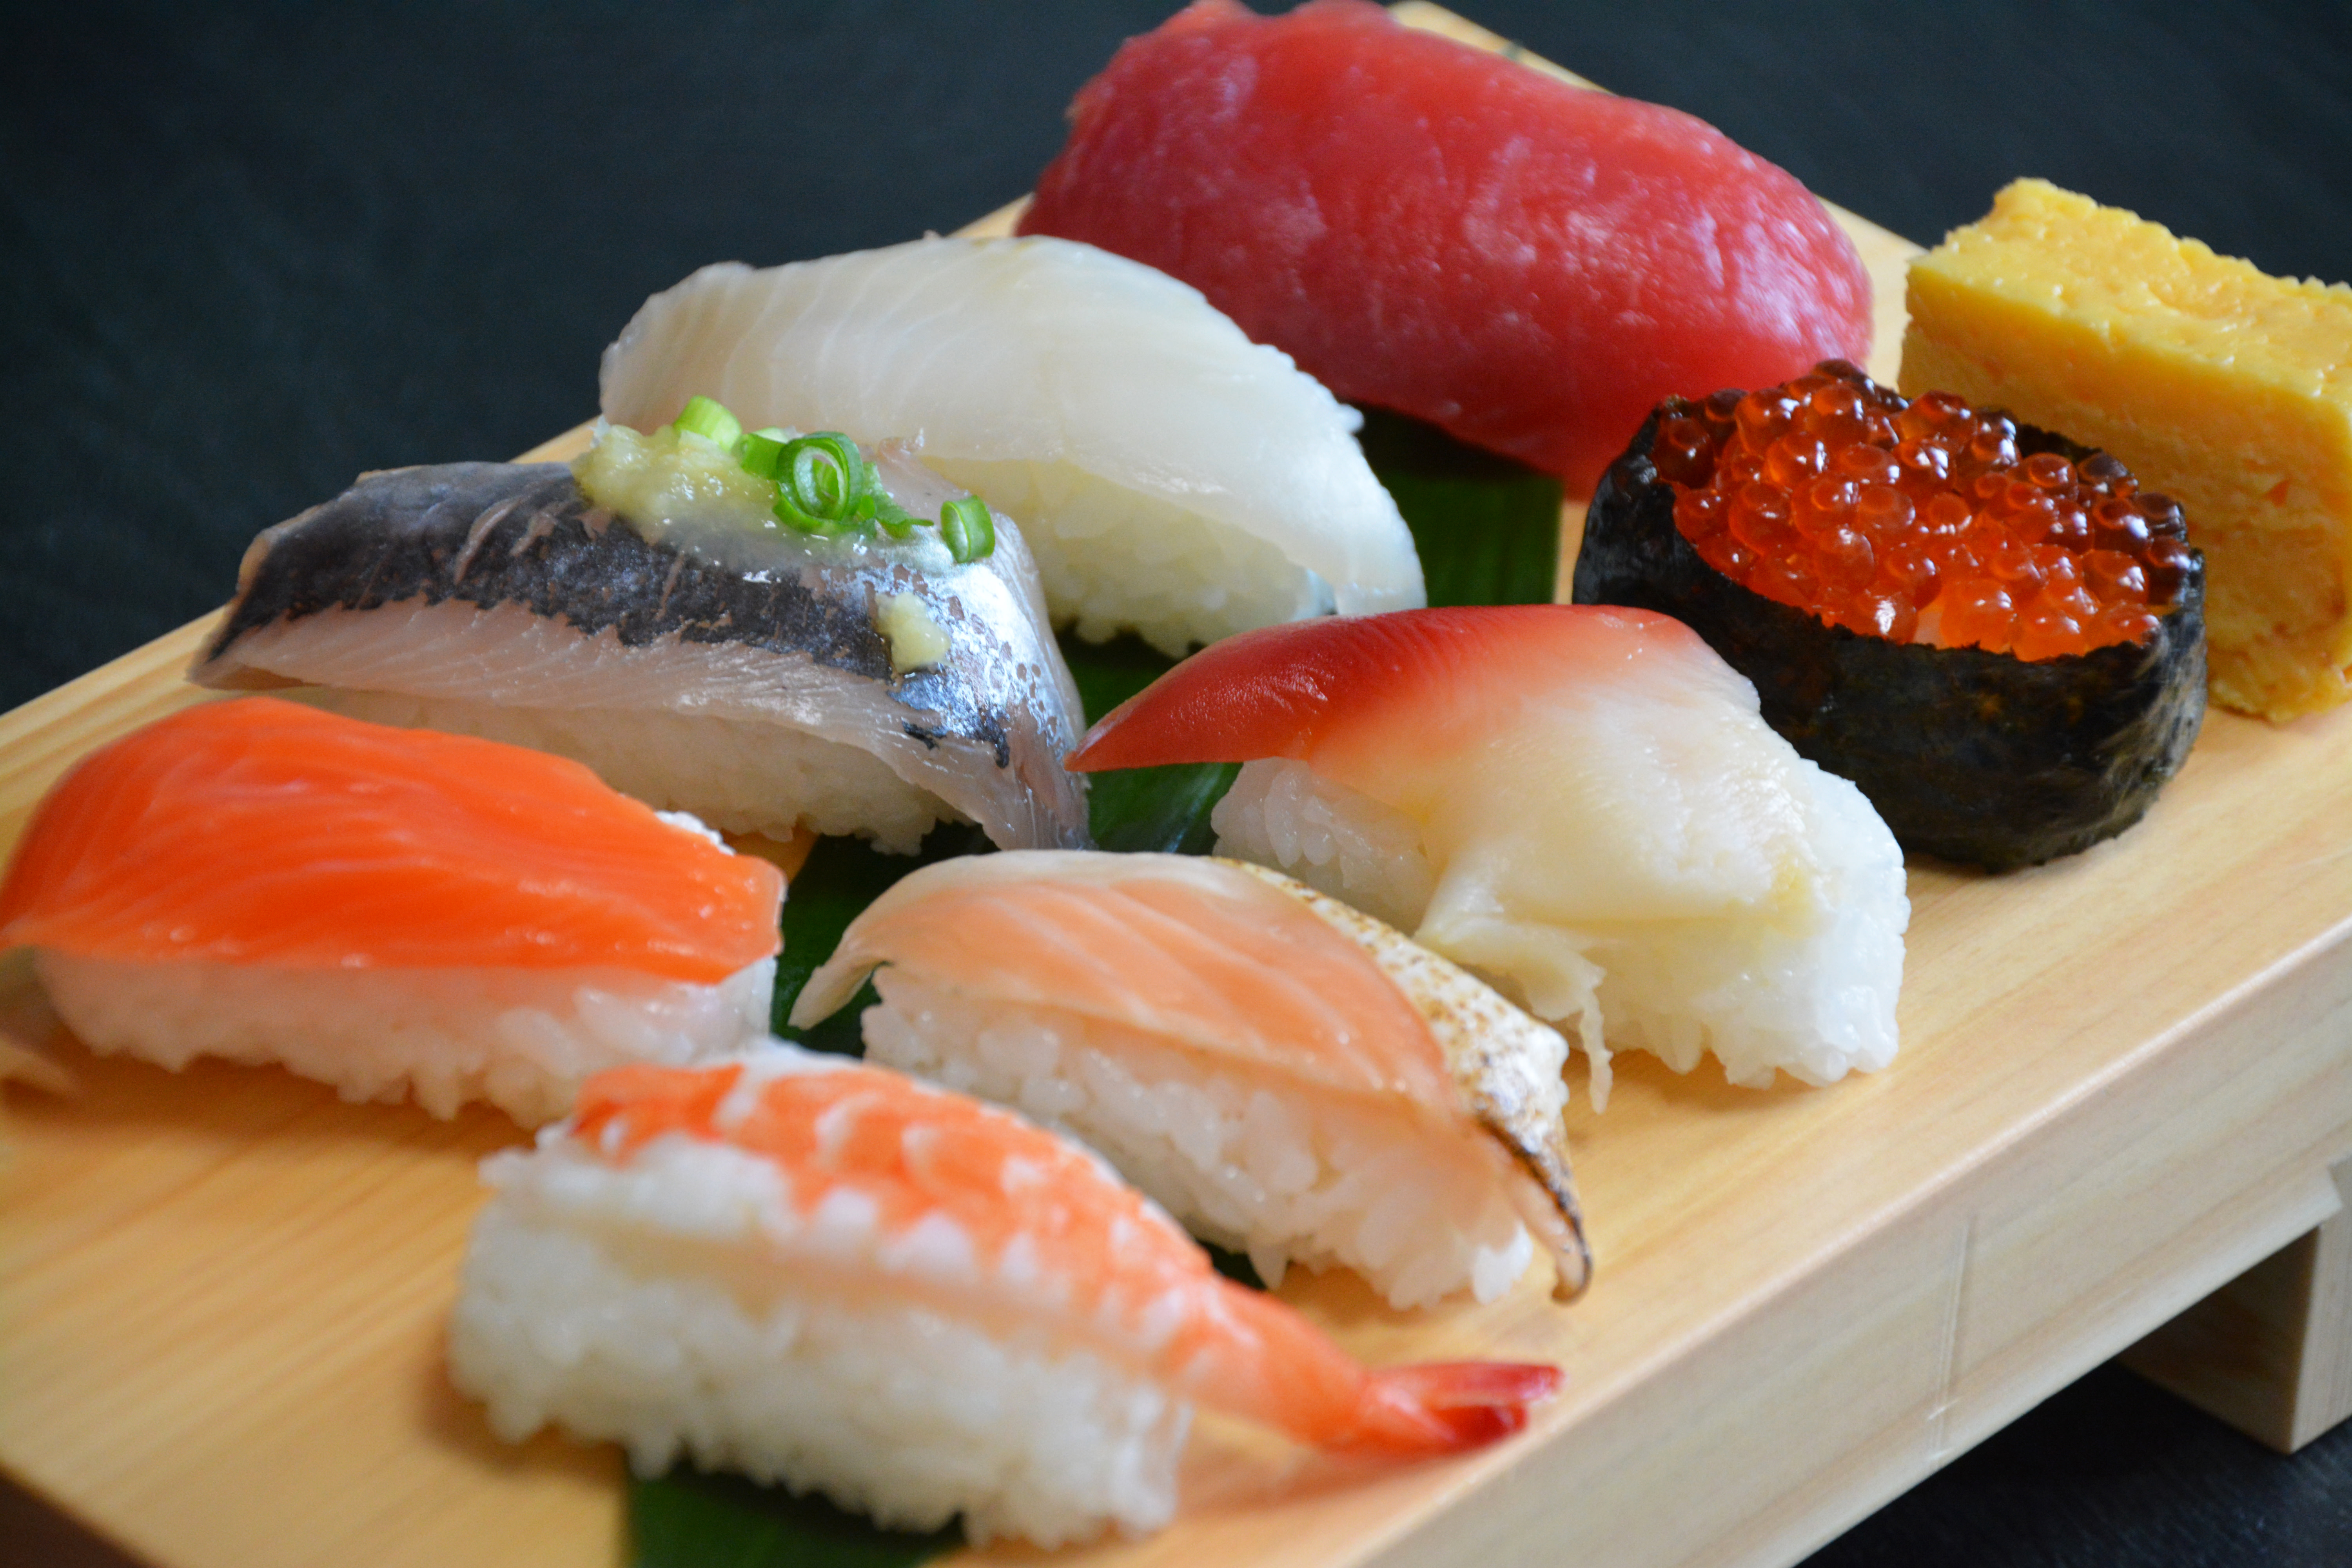 A traditional wooden platter of colourful nigiri sushi (small balls of rice topped with slices of raw fish).